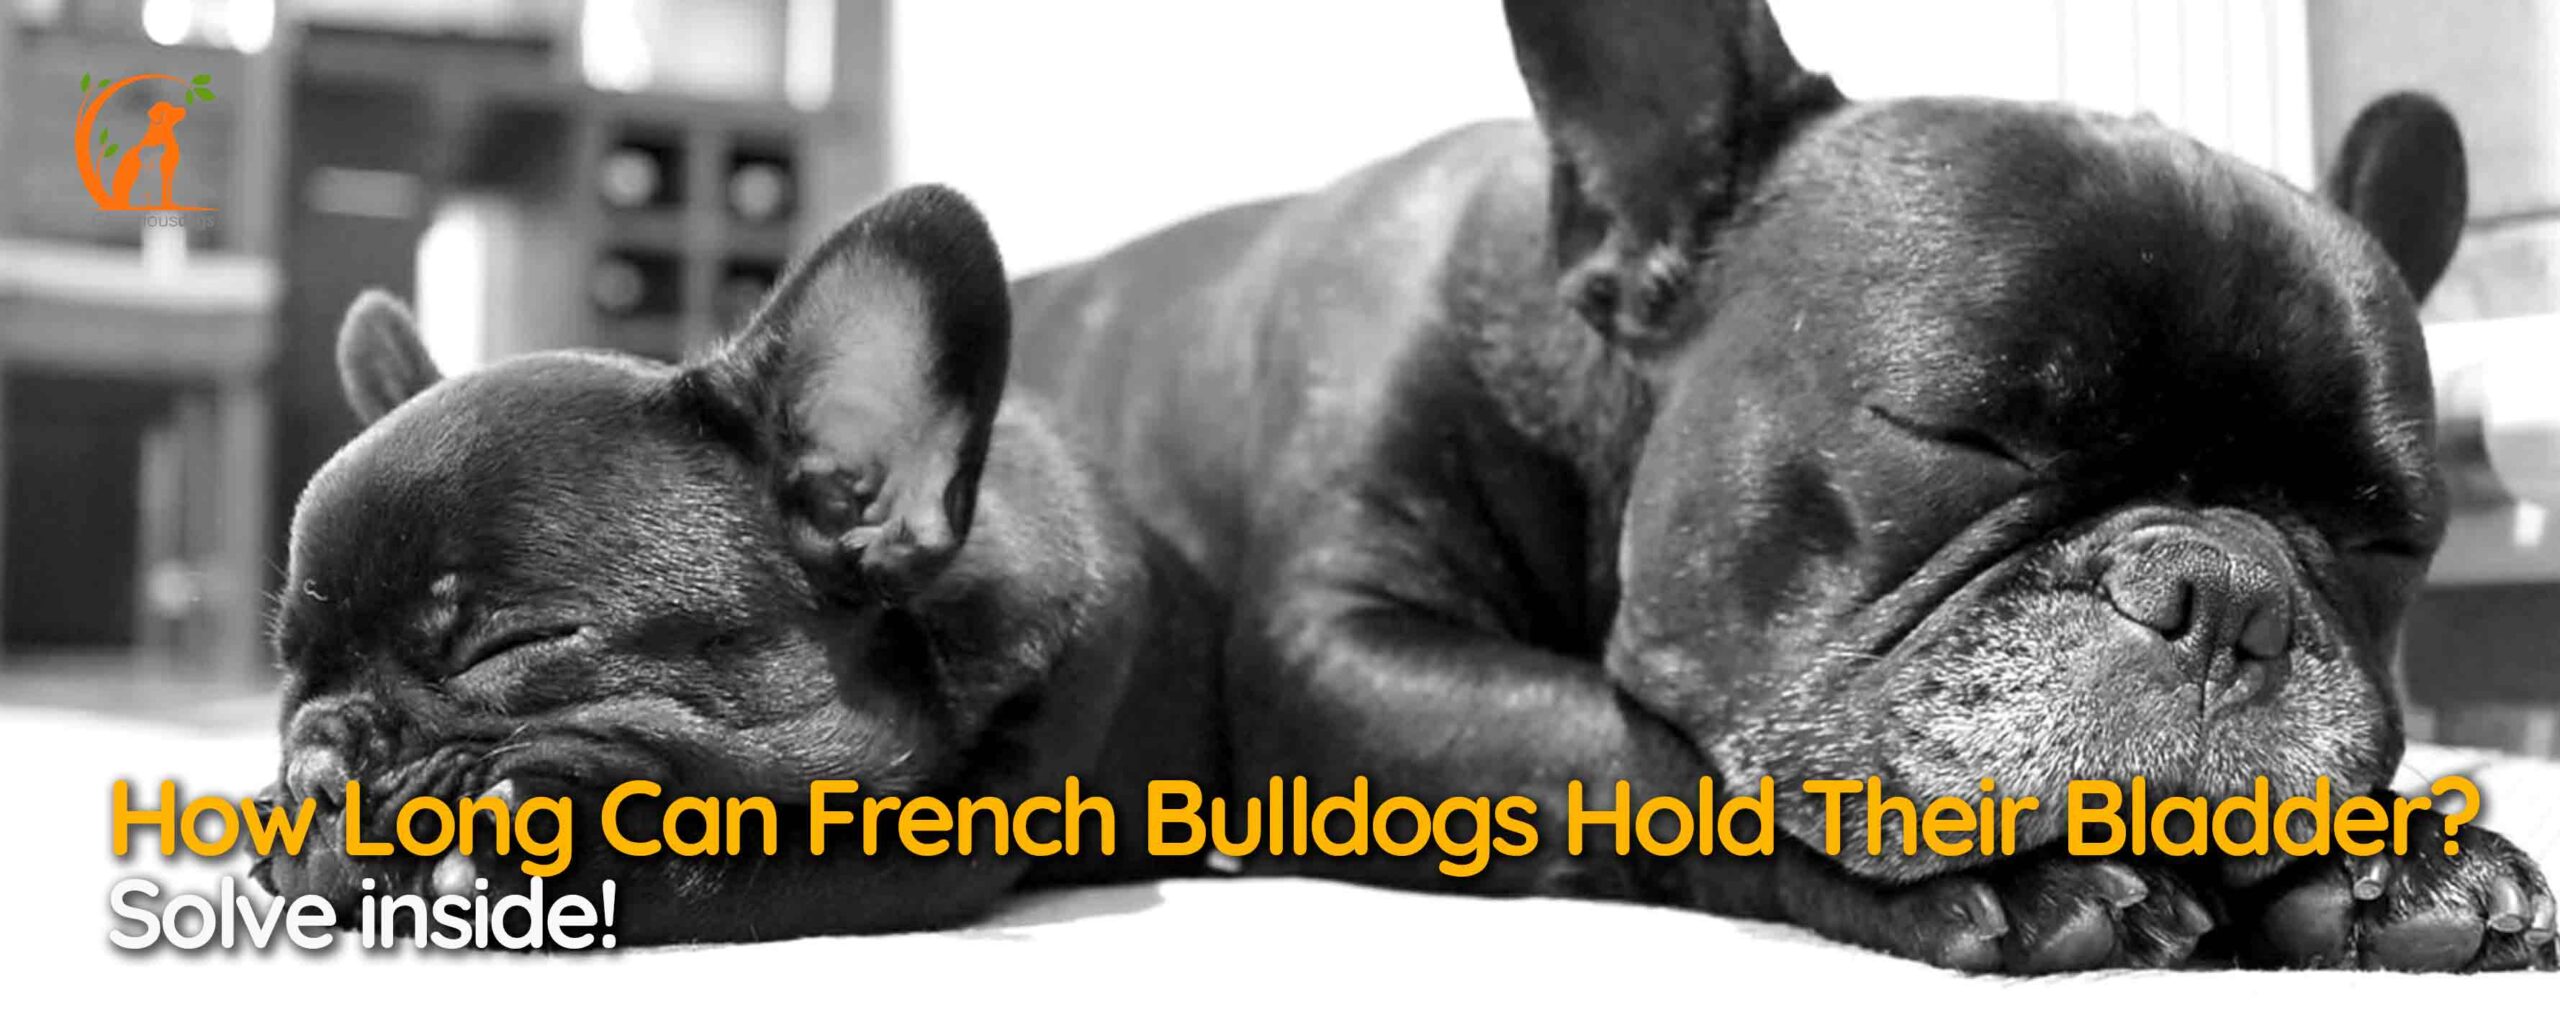 How Long Can French Bulldogs Hold Their Bladder? Solve inside!